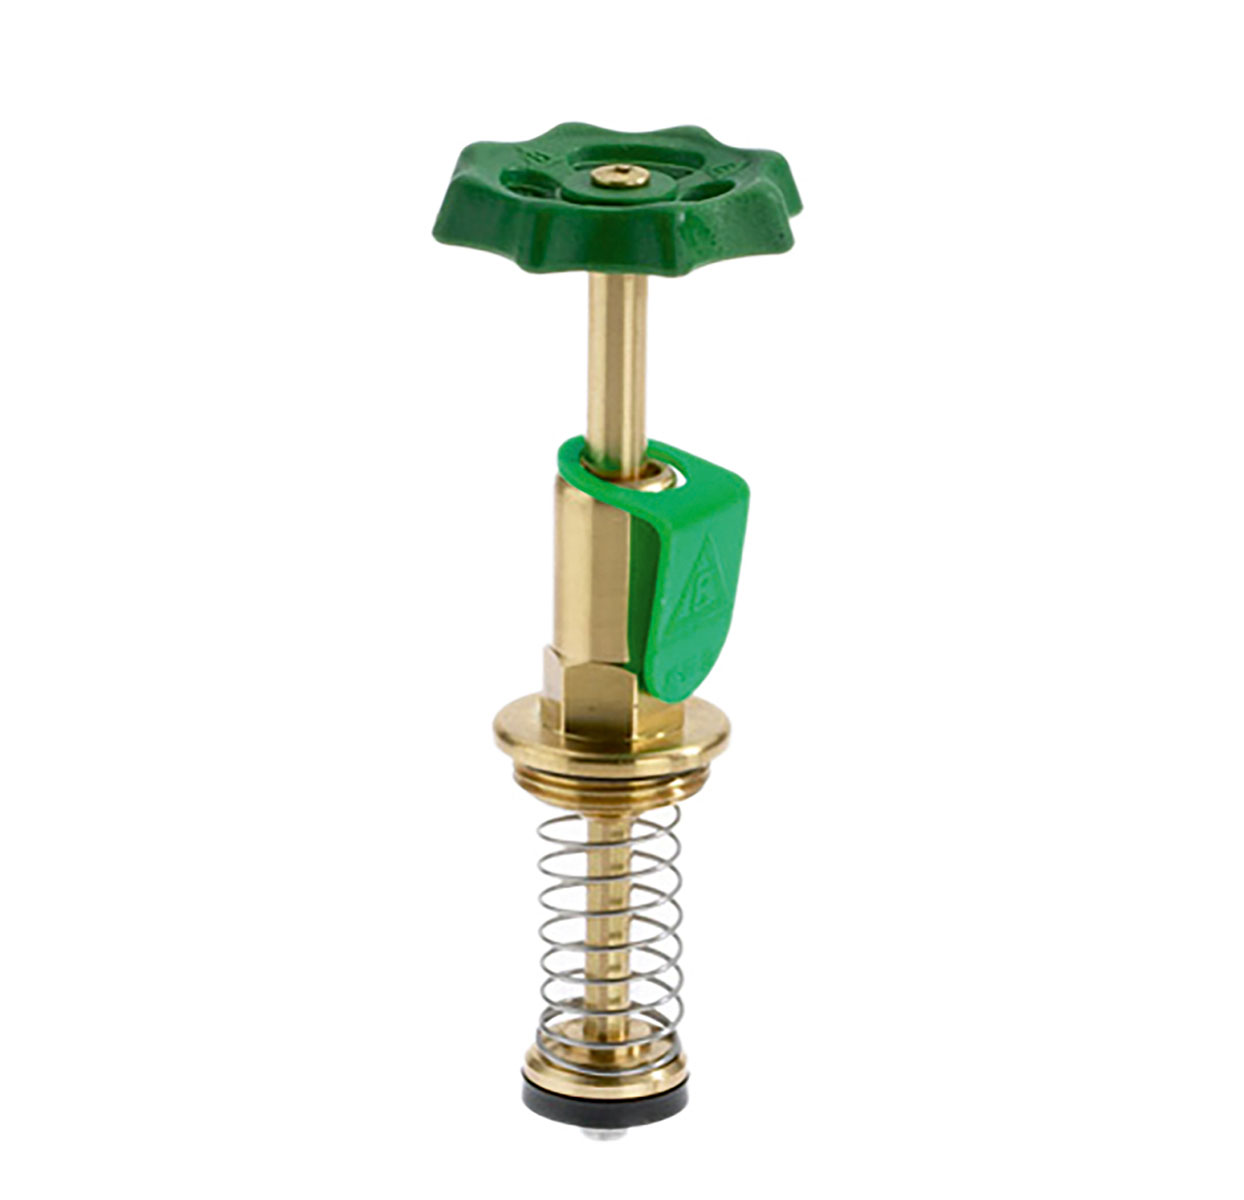 1213320 - Brass Upper-part with grease chamber for Combined Free-flow and Backflow-preventer valves, risinge Spindel